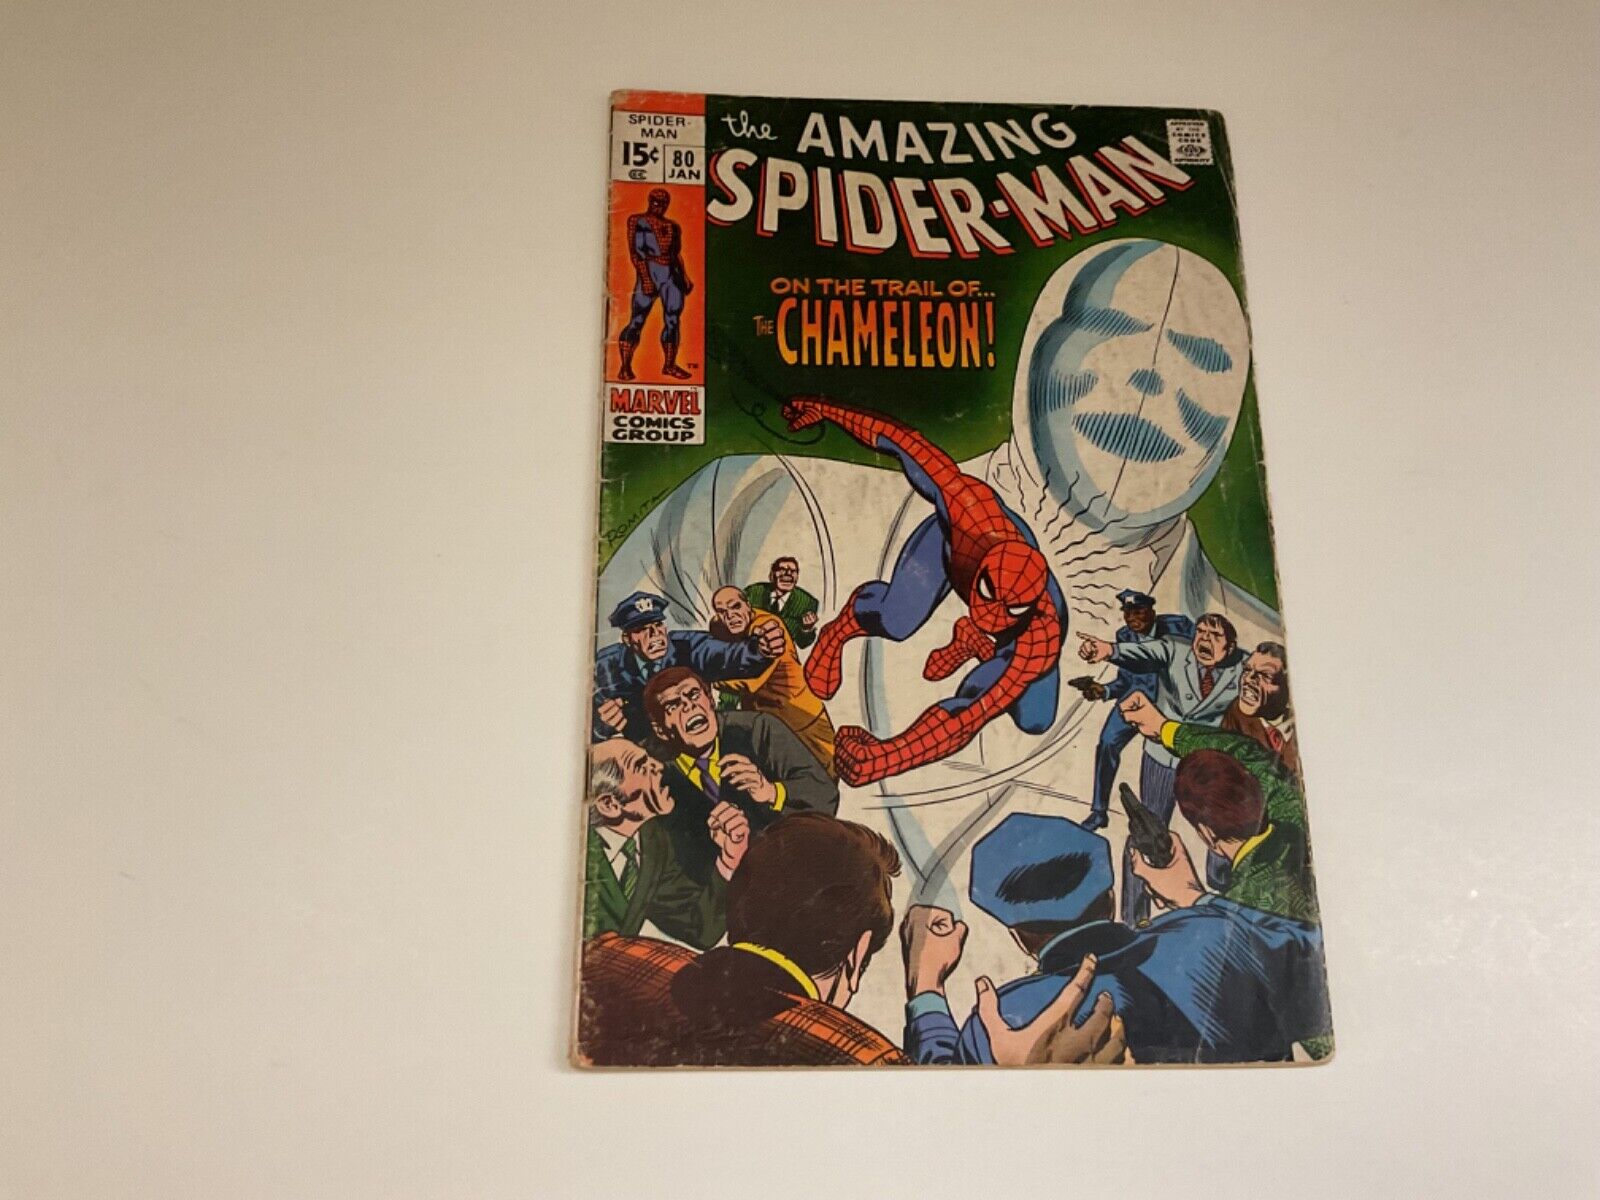 The Amazing Spider-Man #80 On The Trail Of Chameleon Marvel Bronze Age 1970 VG